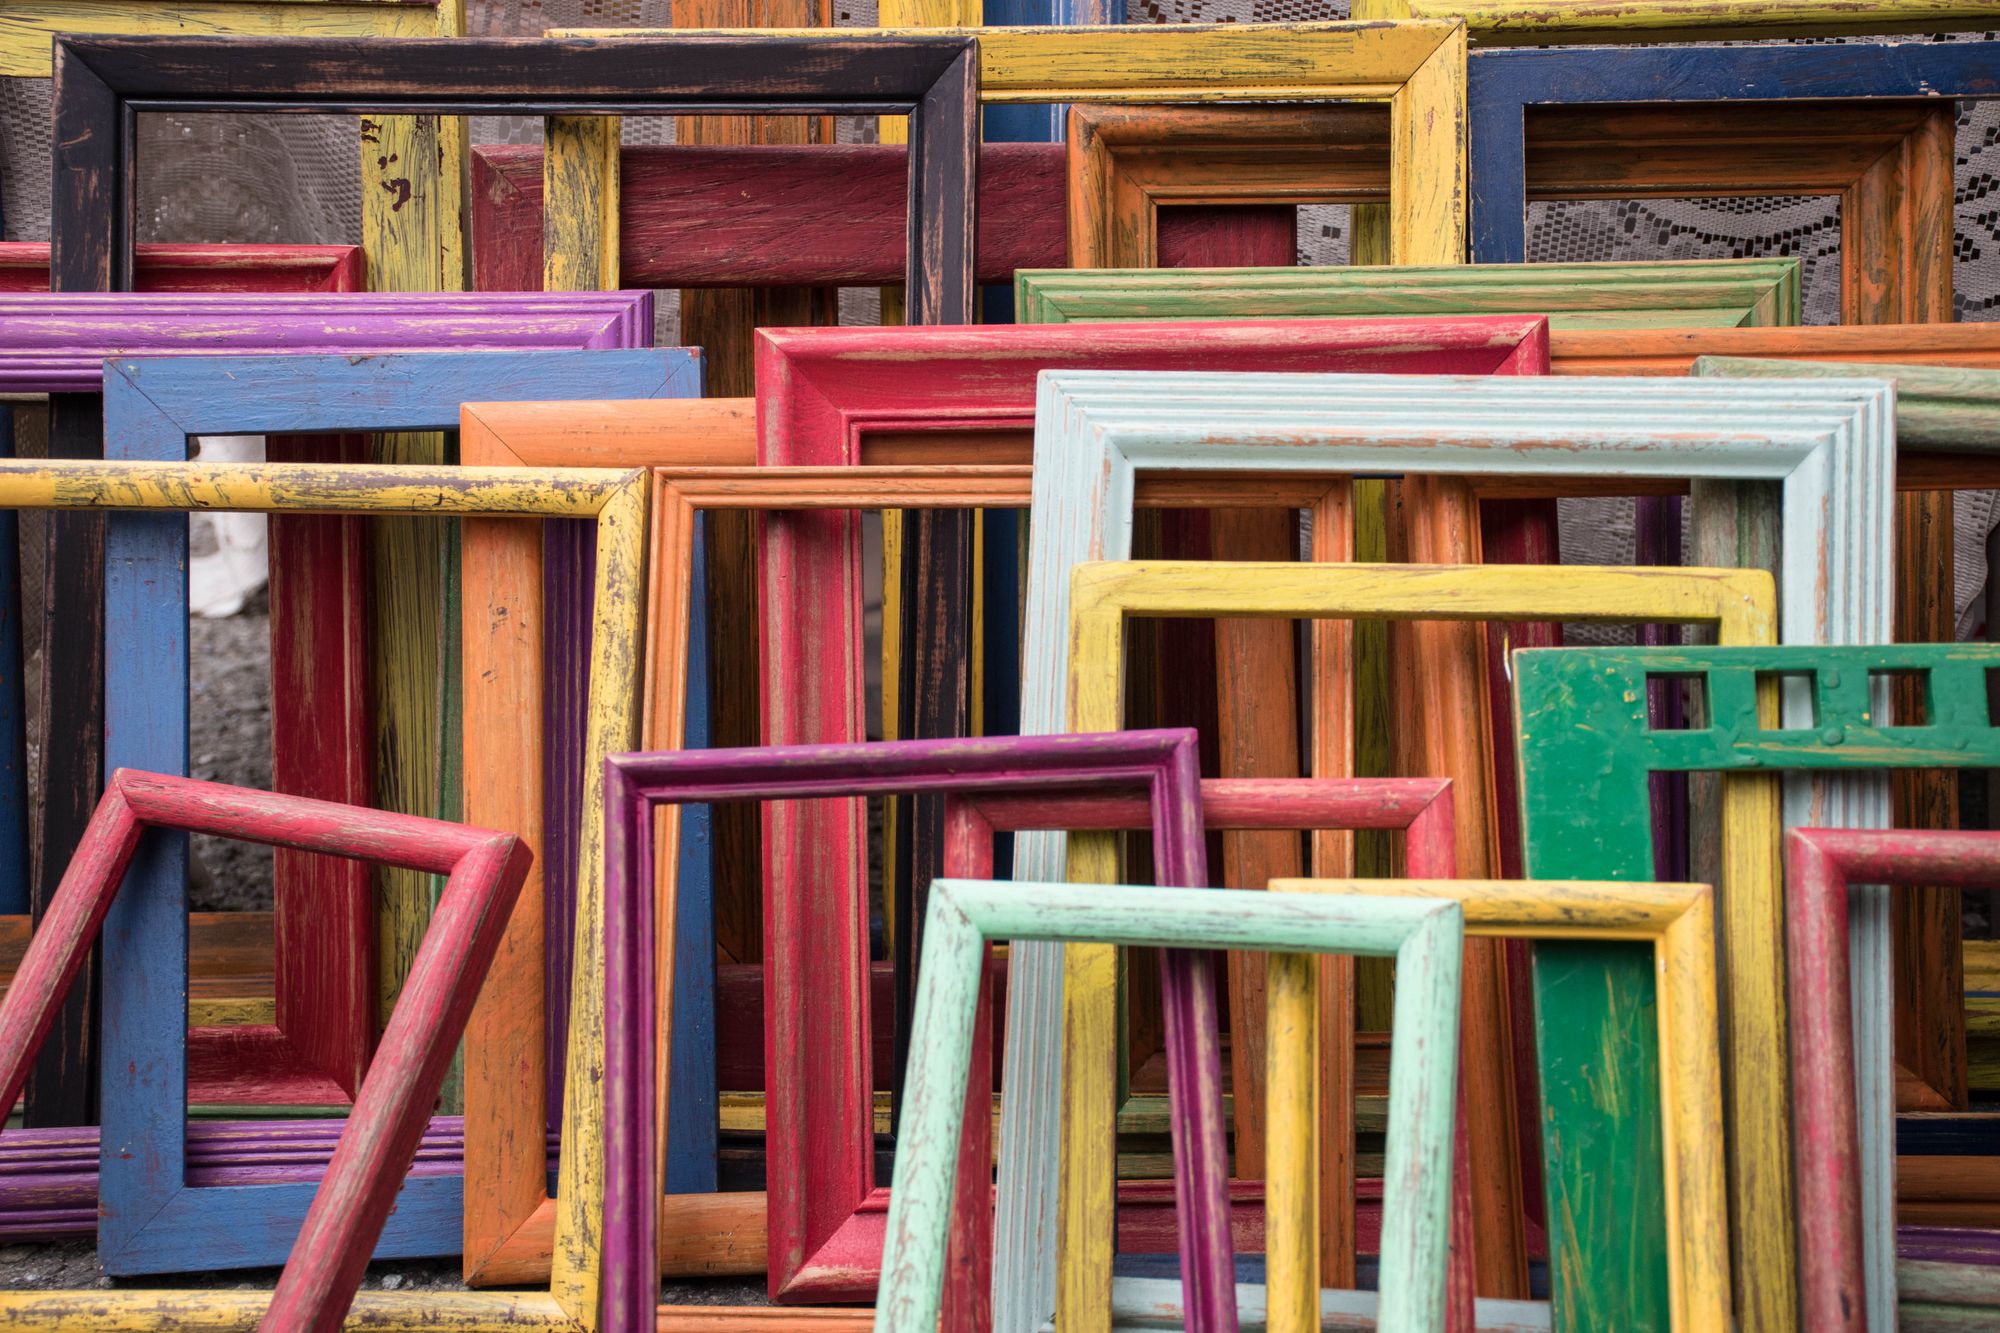 Many colorful and empty frames stacked next to and behind each other.